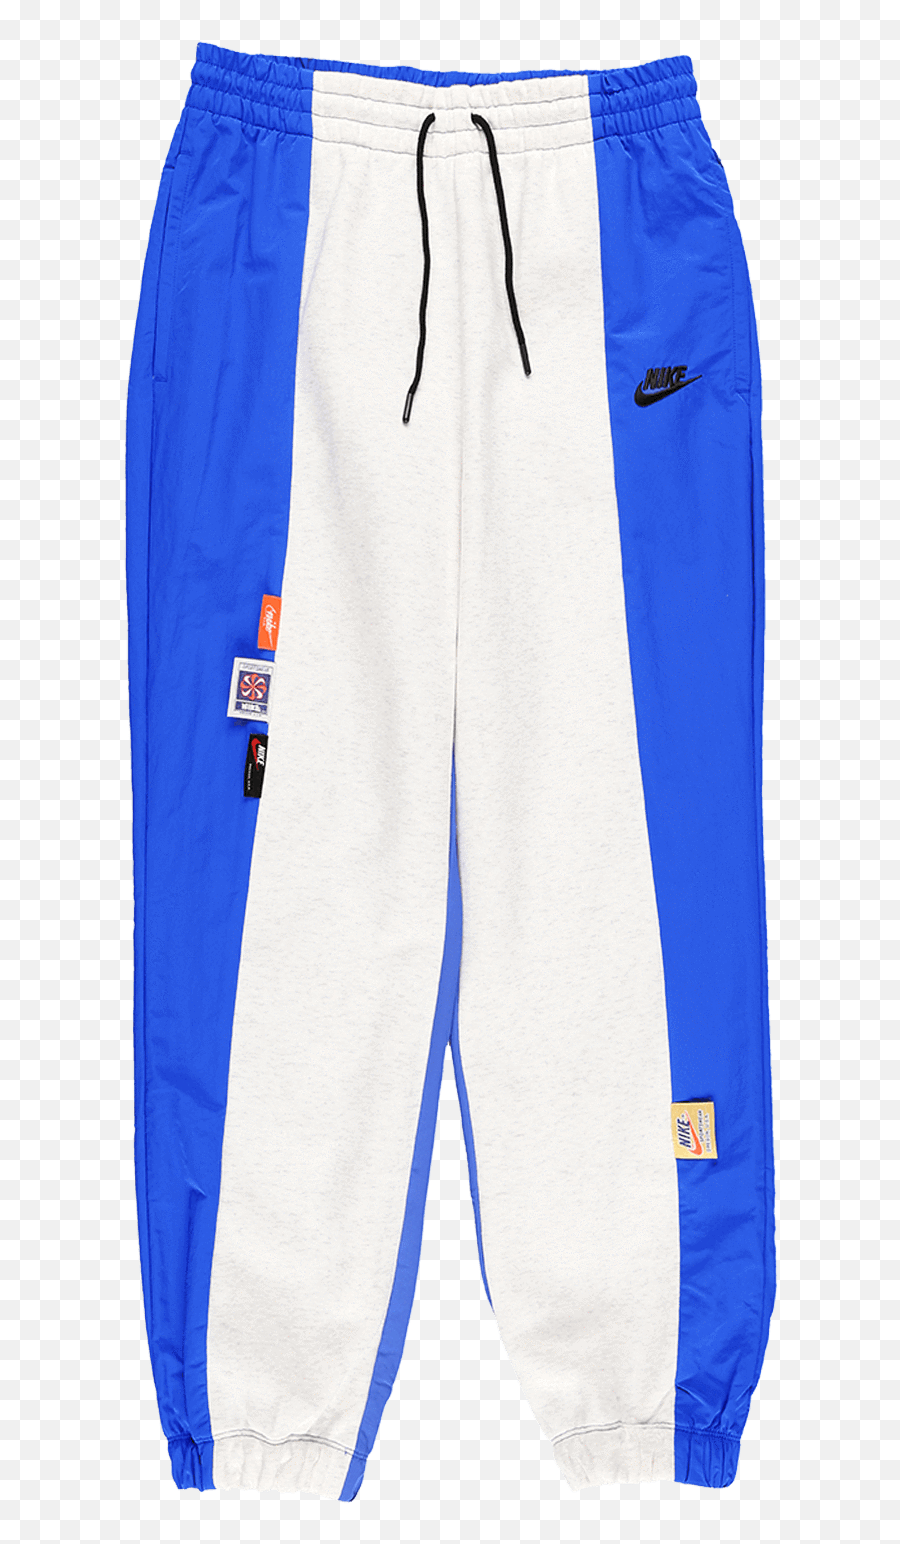 Nike Power Icon Clash Pants - Birch Heather Garmentory Nike Sportswear Icon Clash Pants Birch Heather Png,Trousers Shorts Icon